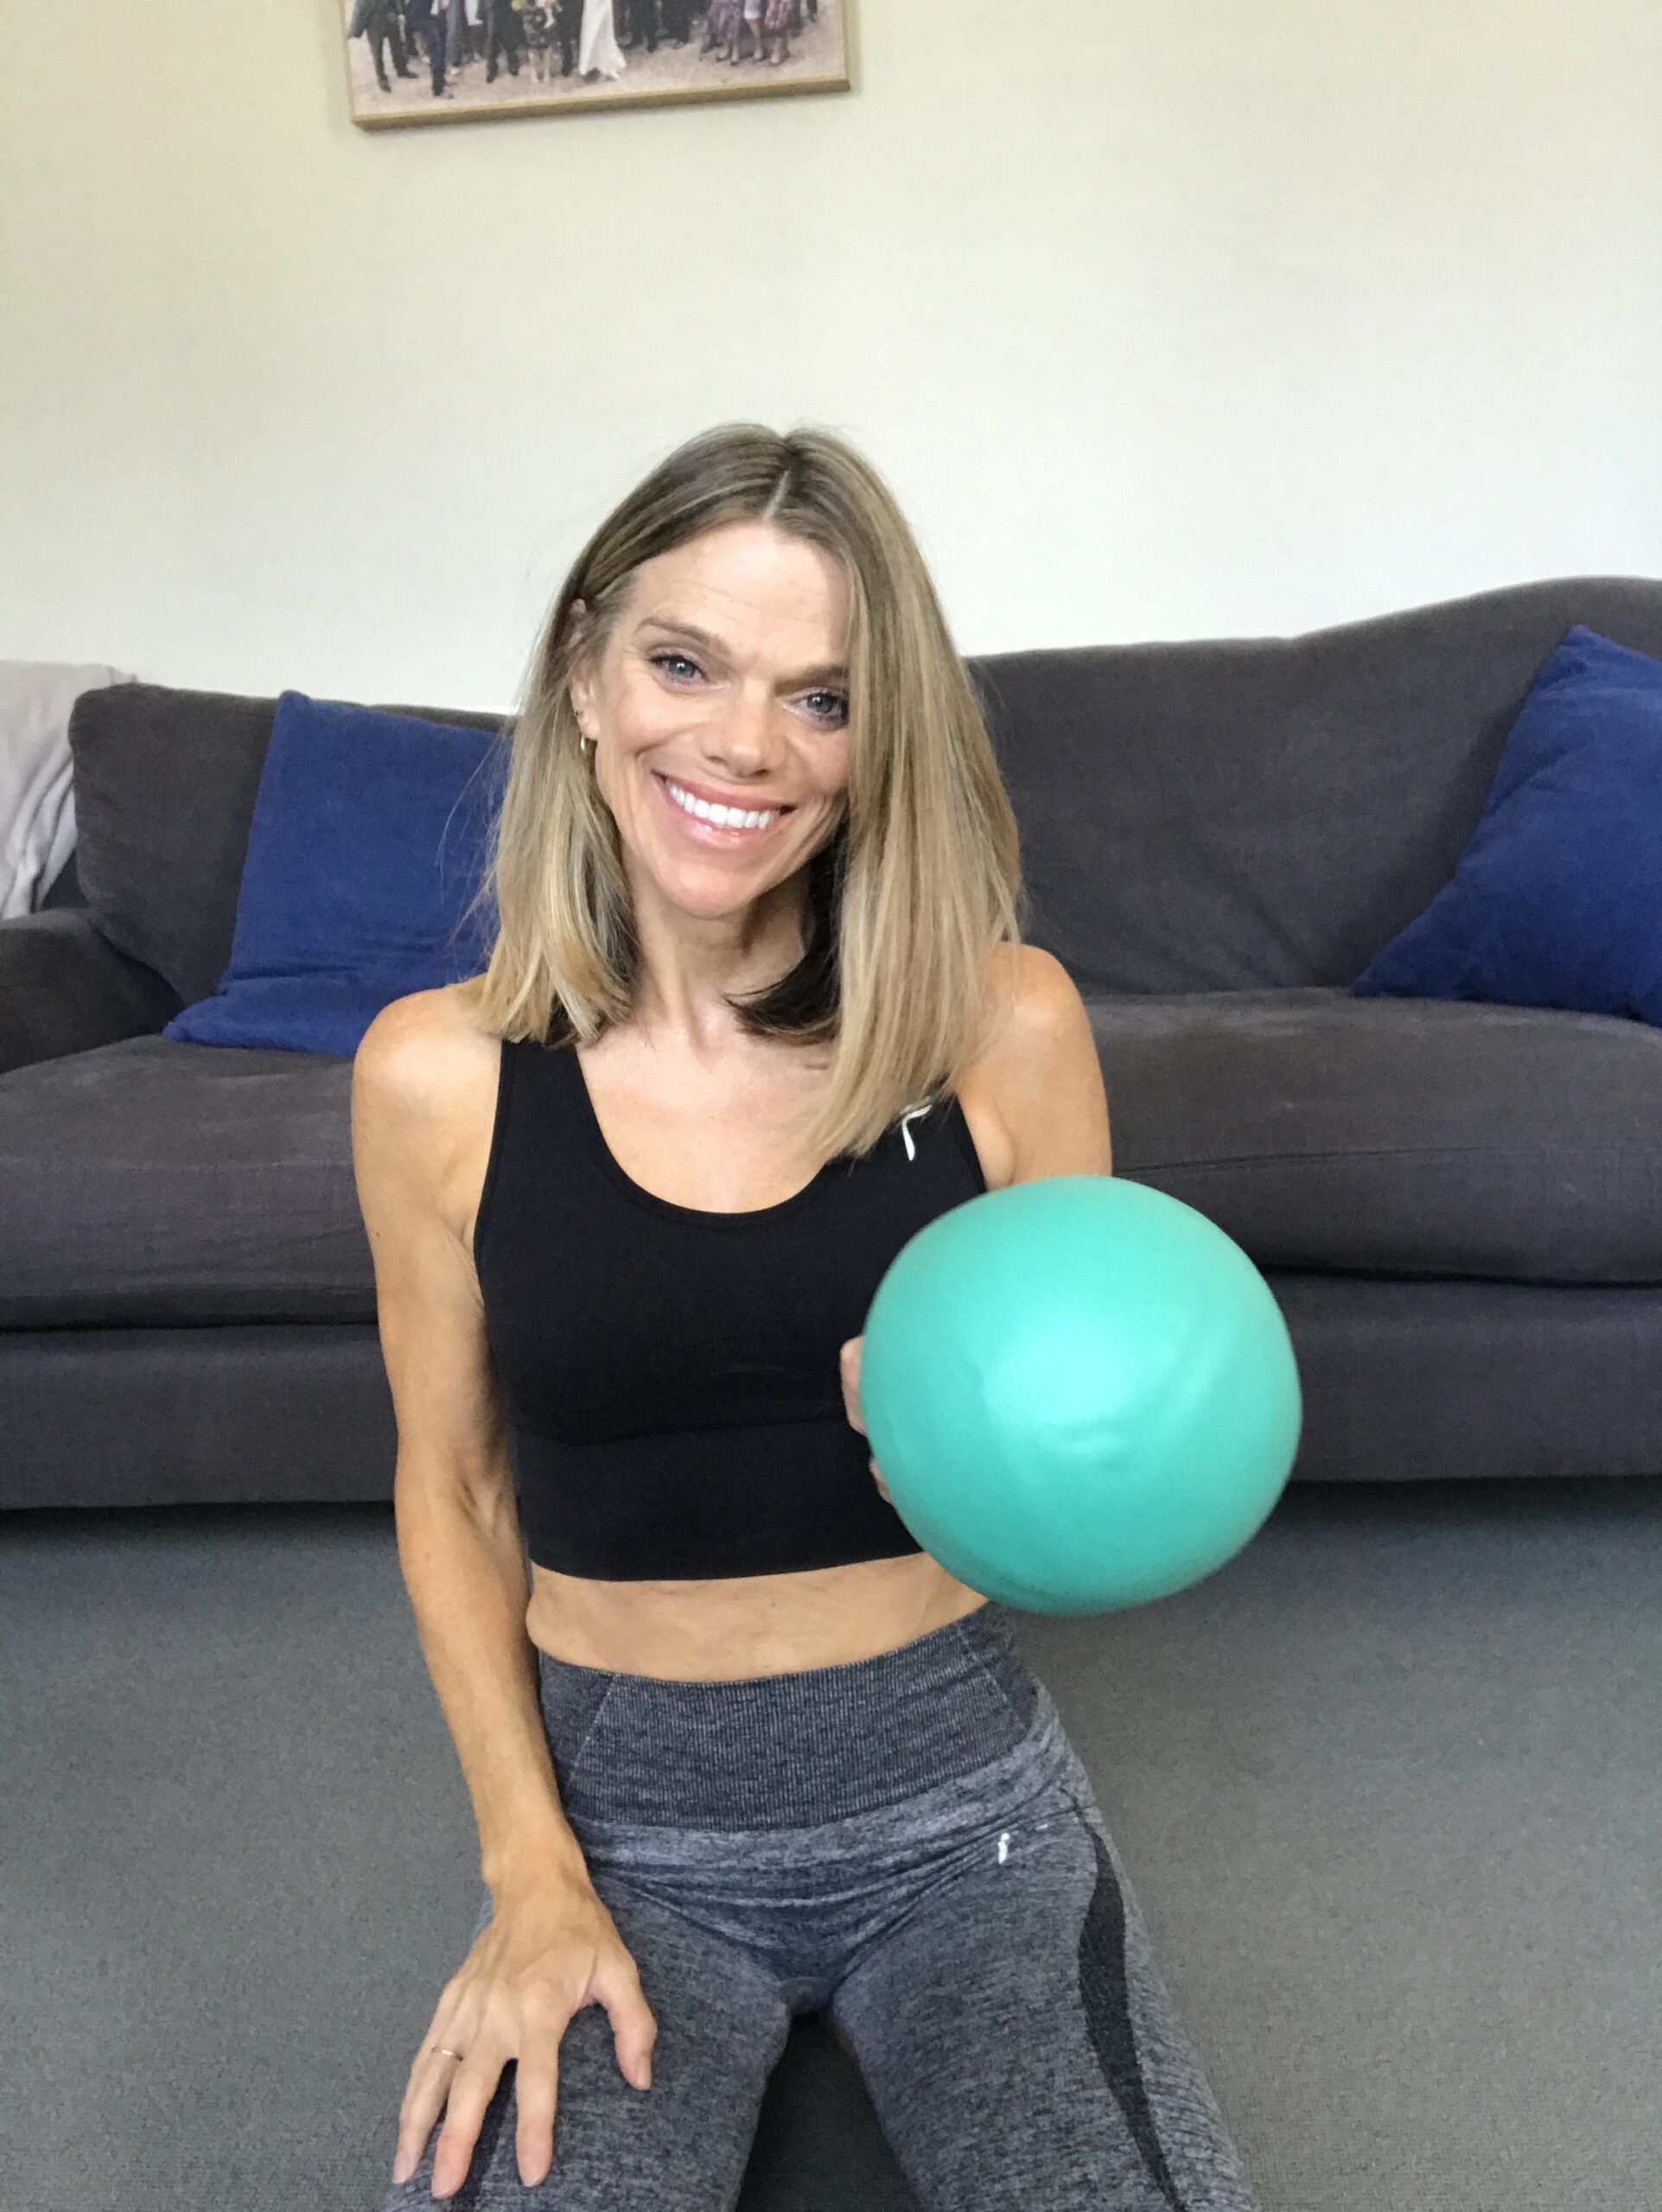 Pilates with soft ball exercises/Pilates on demand Live sessions with Rosa Reeve Weybridge.